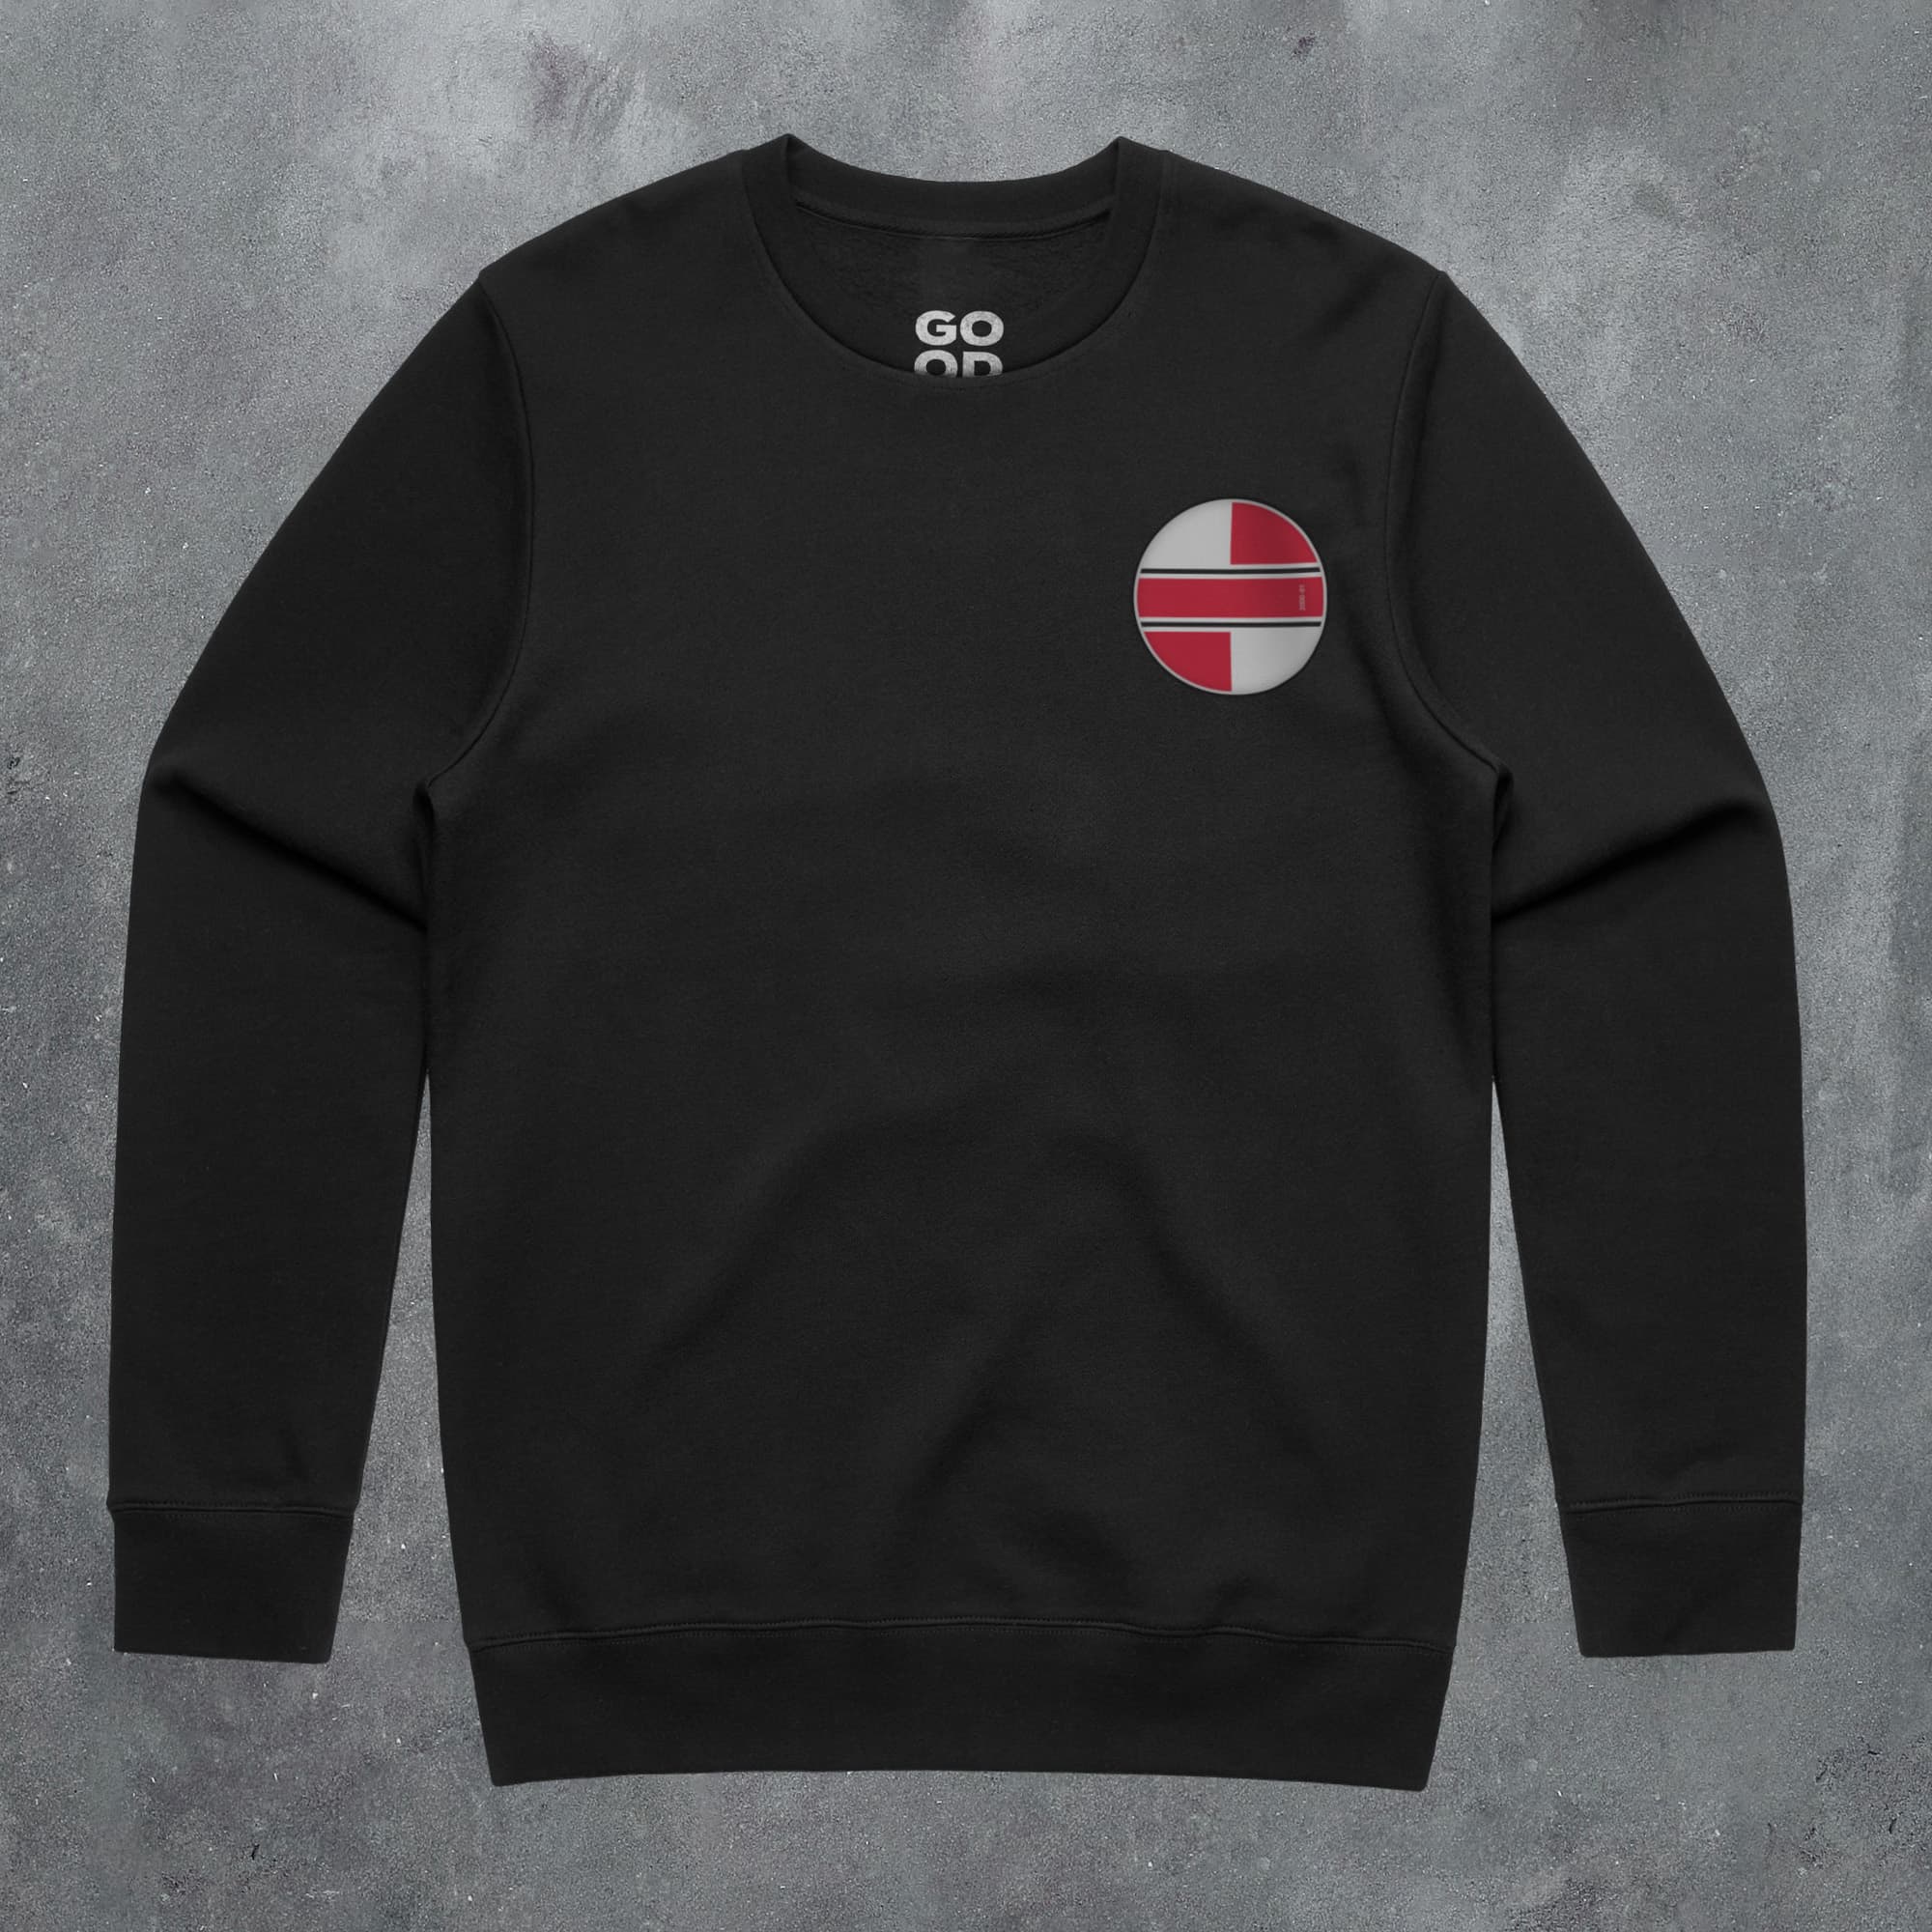 a black sweatshirt with a red and white circle on it